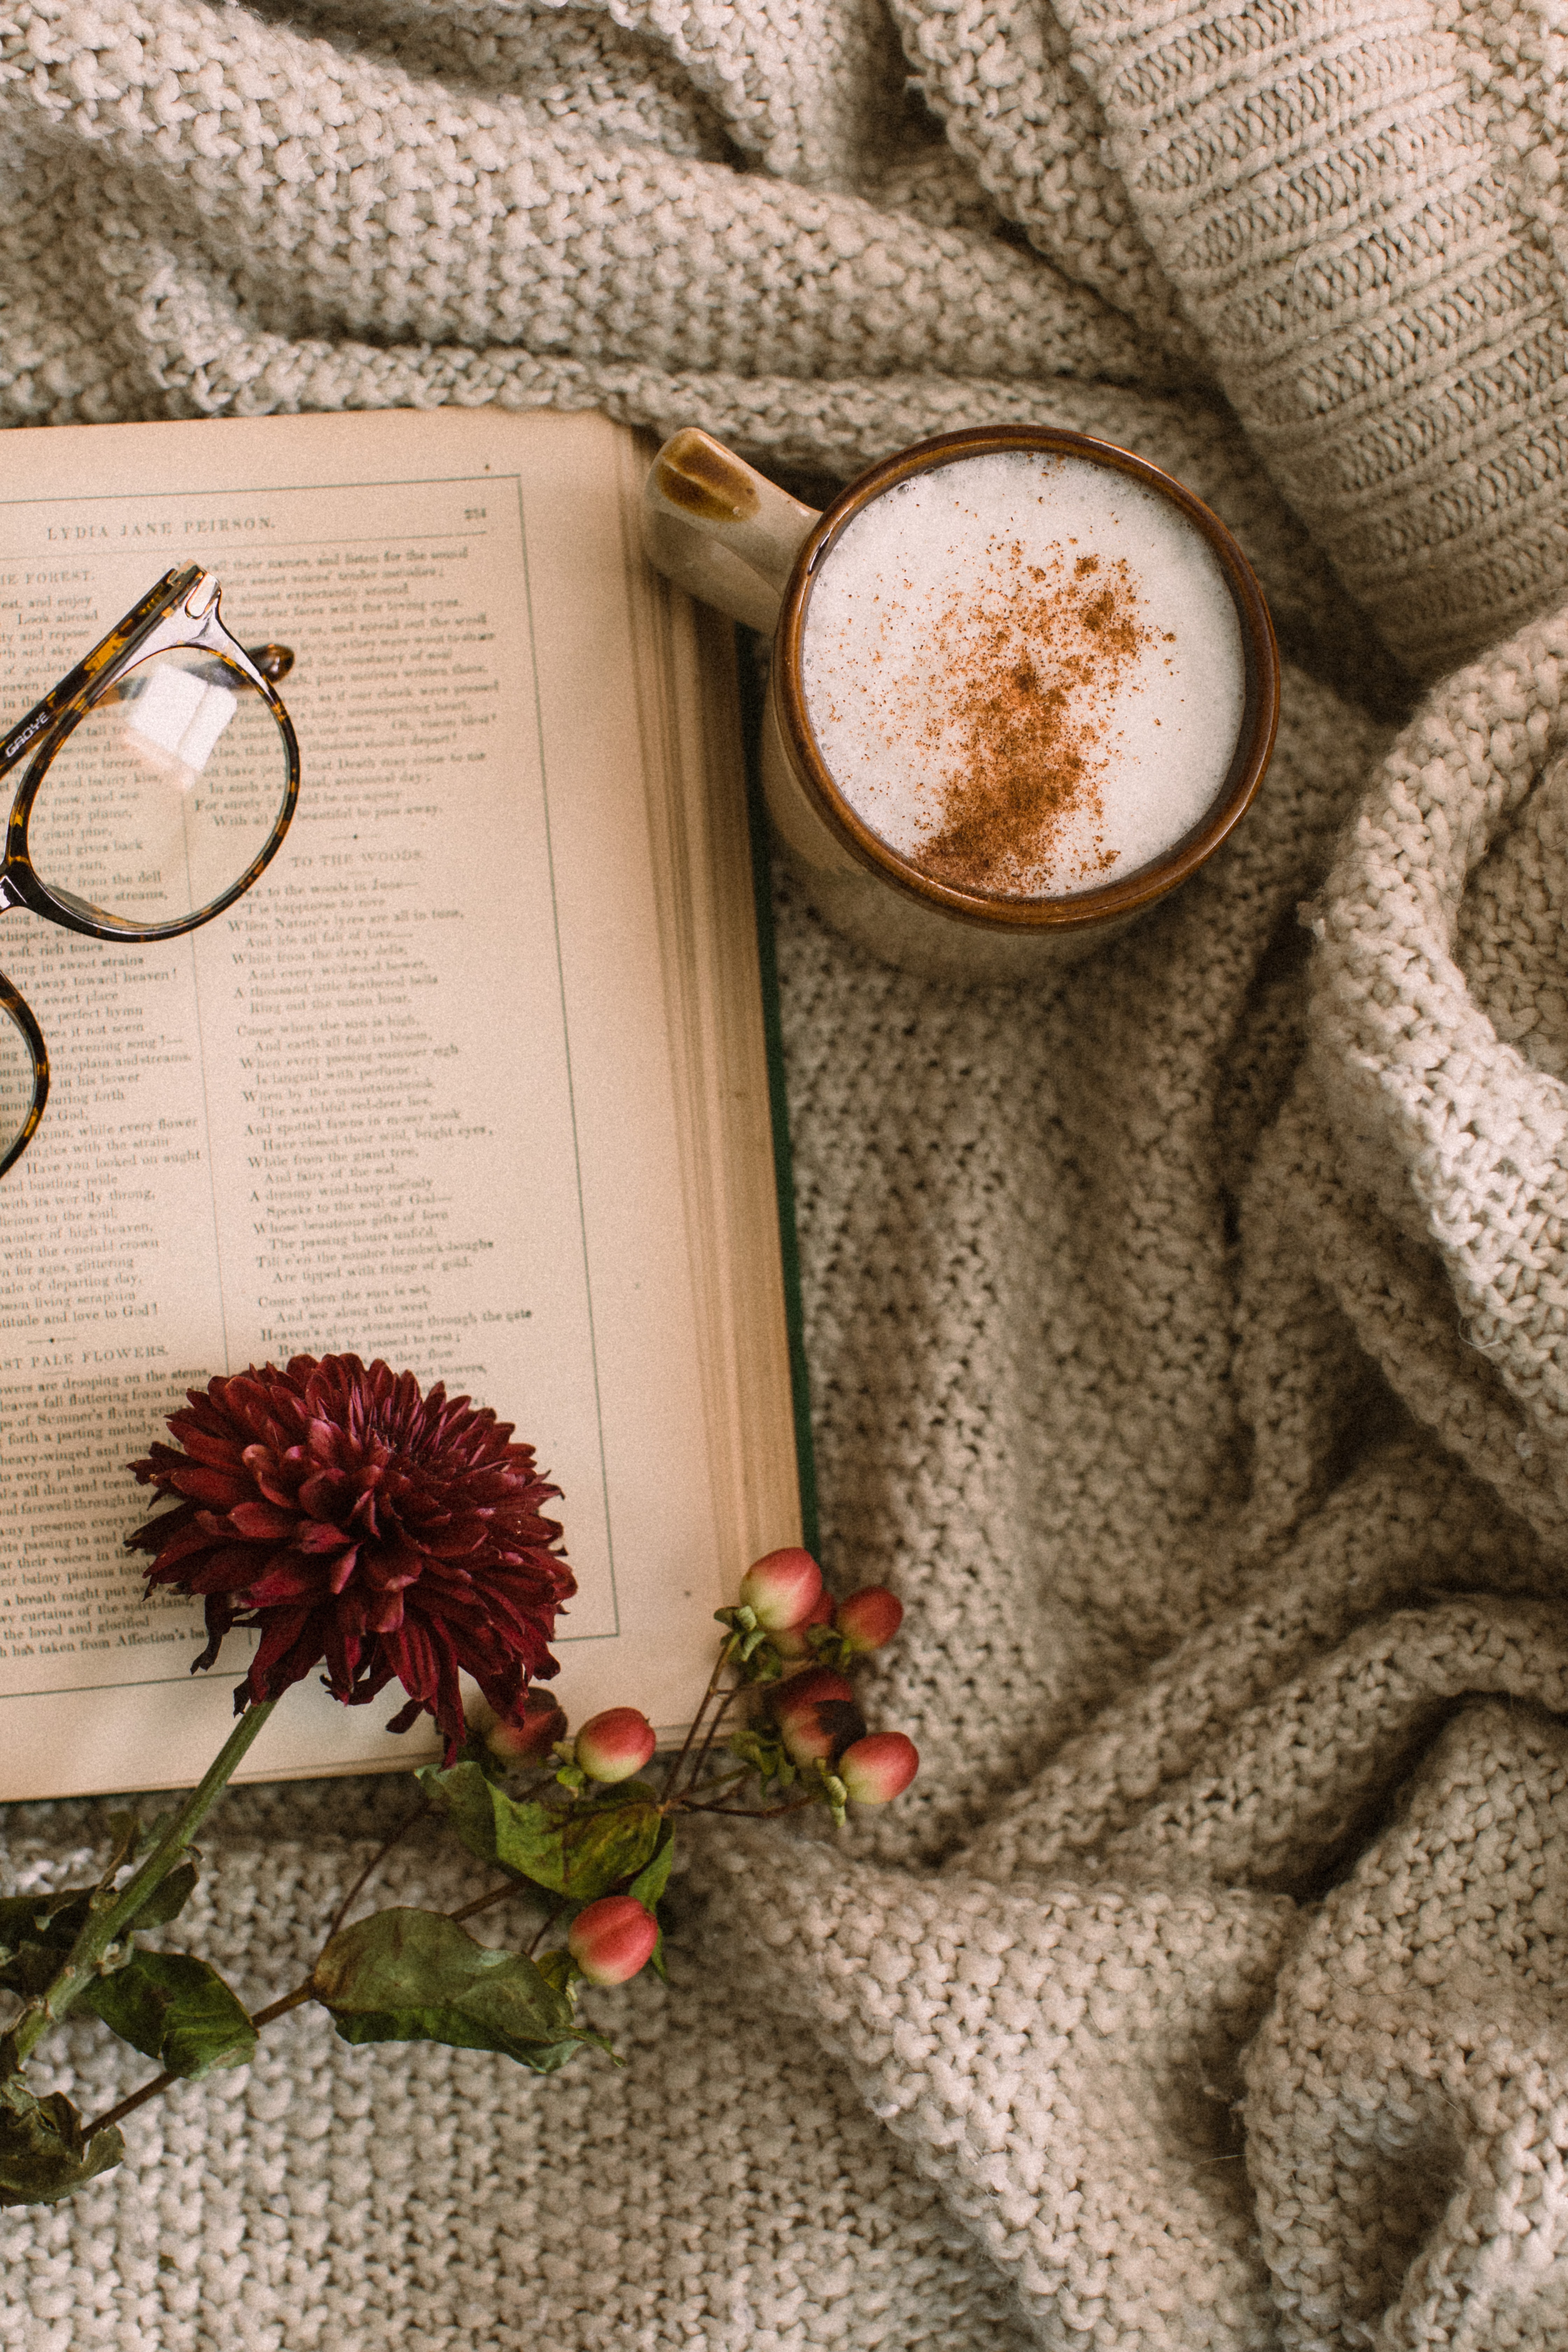 cup, book, food, flowers, coffee, cappuccino, glasses, spectacles, mug